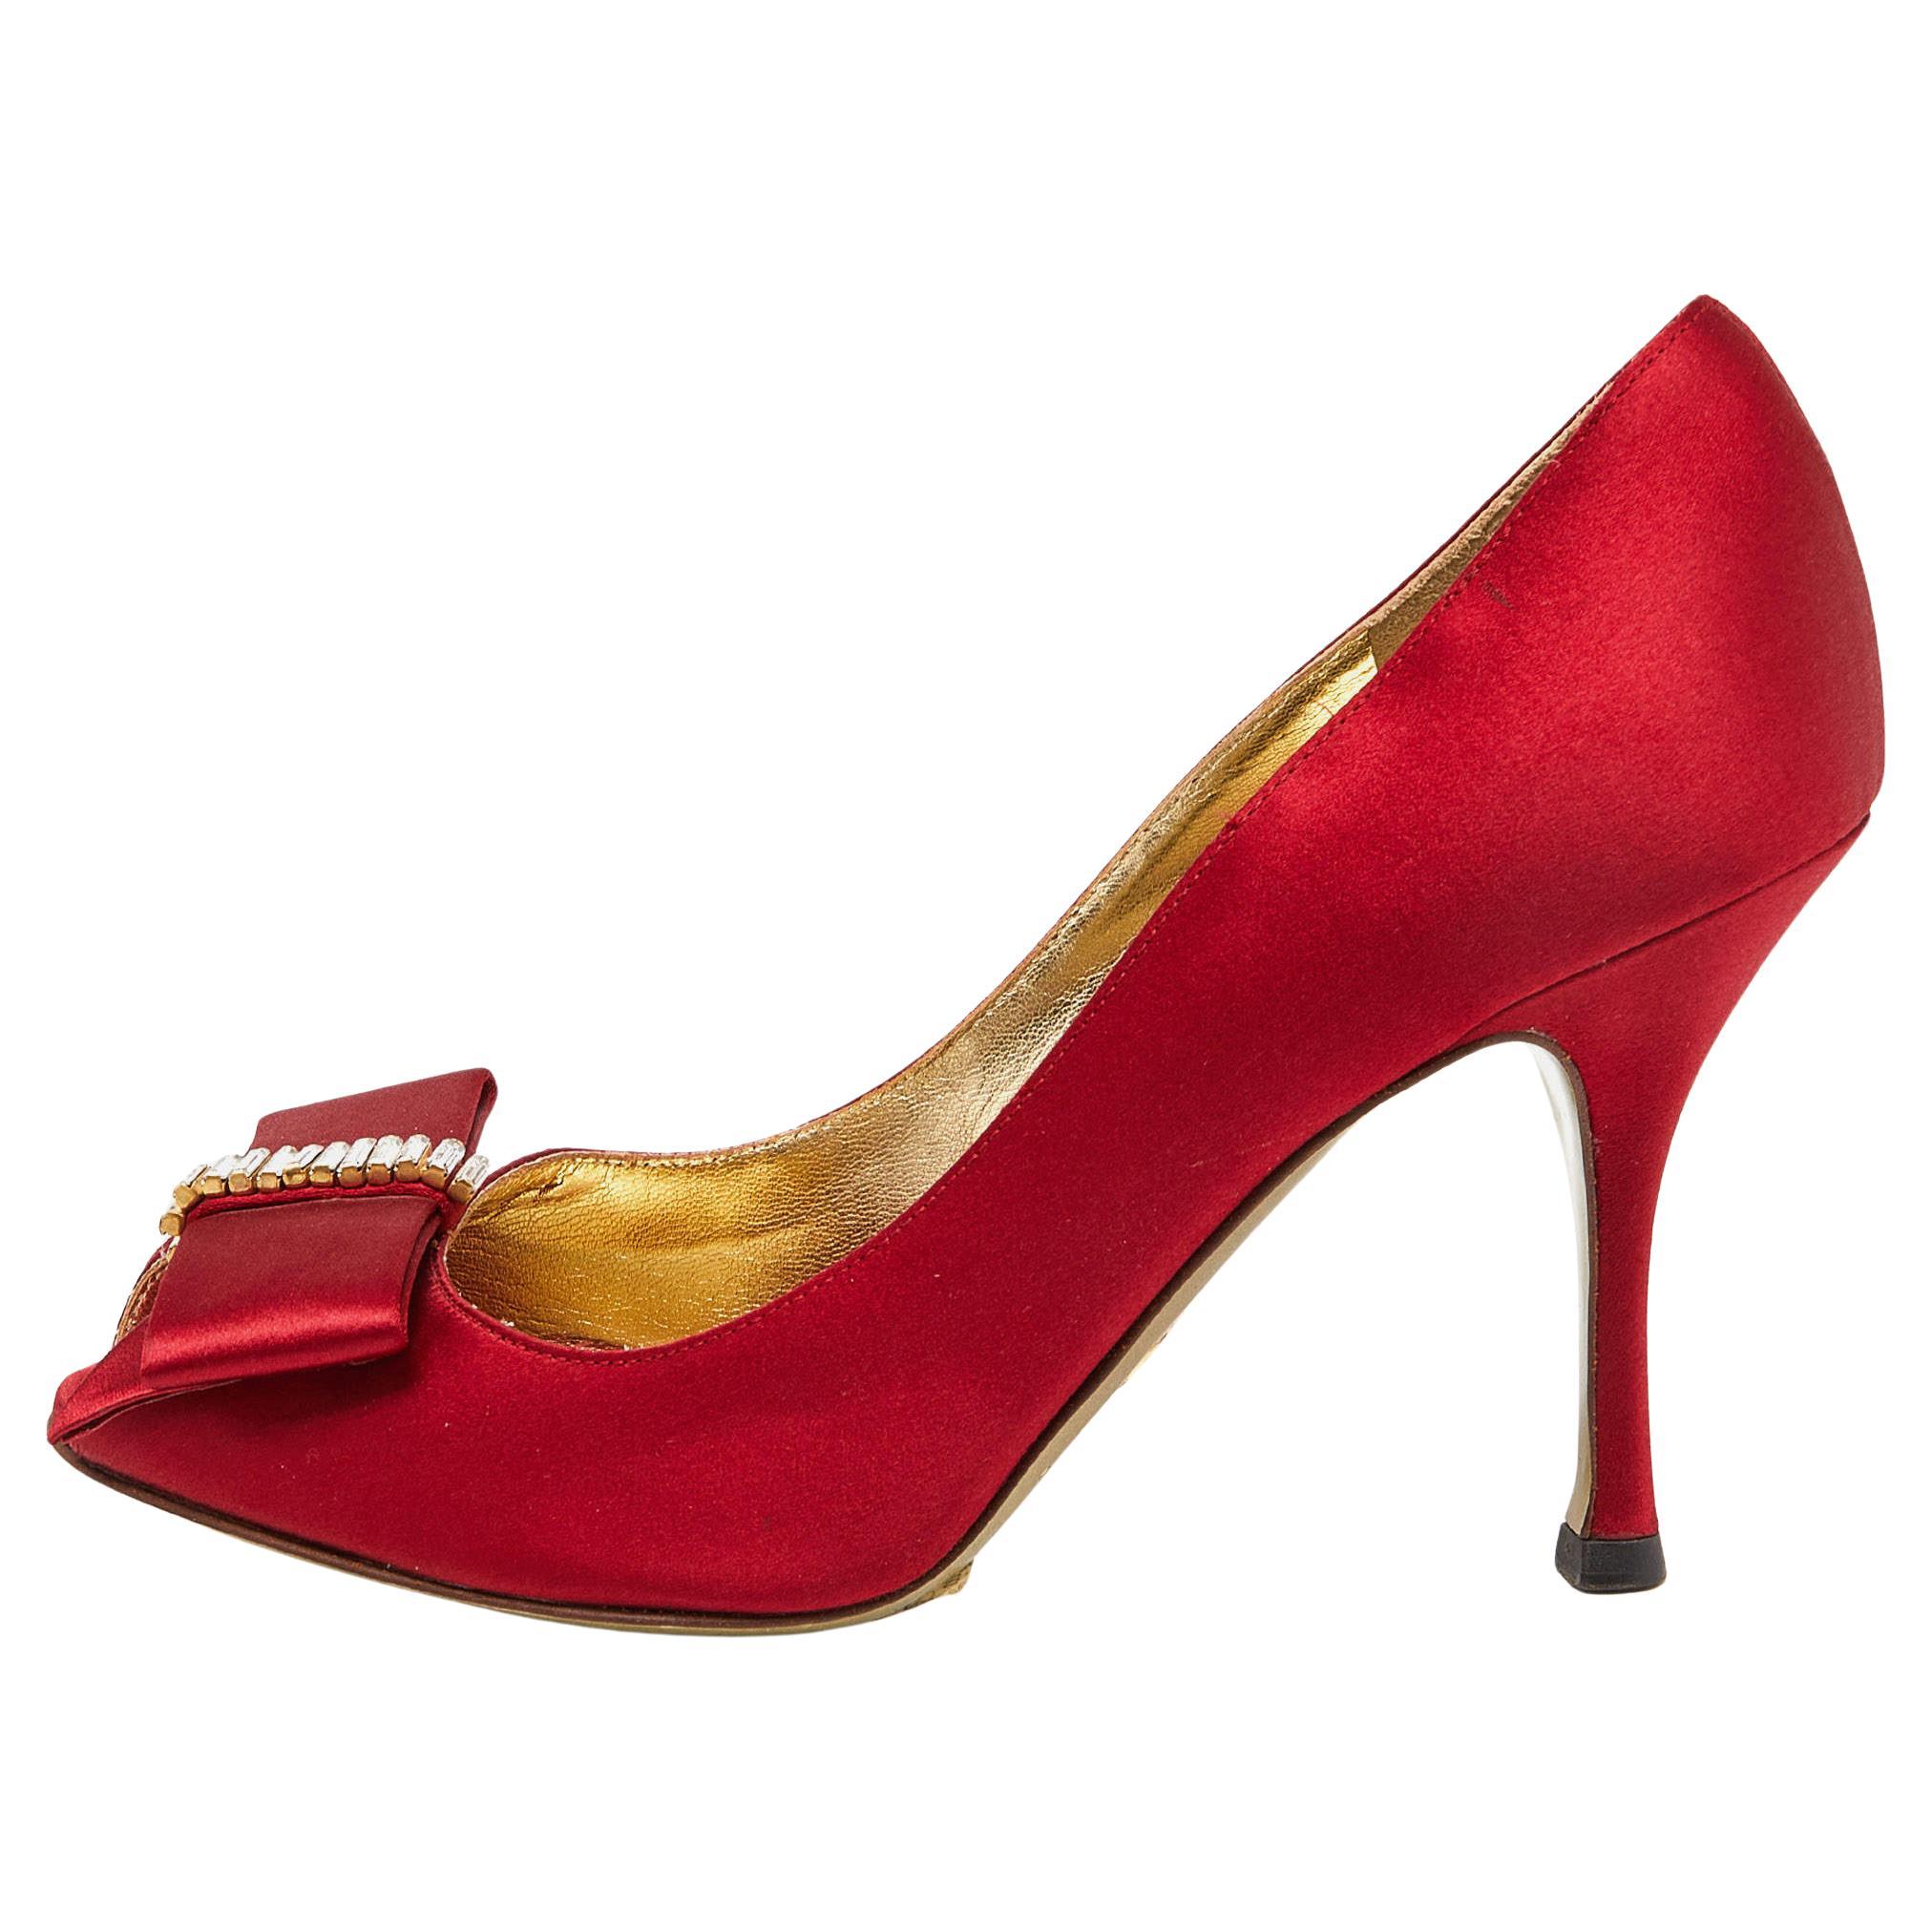 Dolce & Gabbana Red Satin Crystal Embellished Bow Peep Toe Pumps Size 37 For Sale